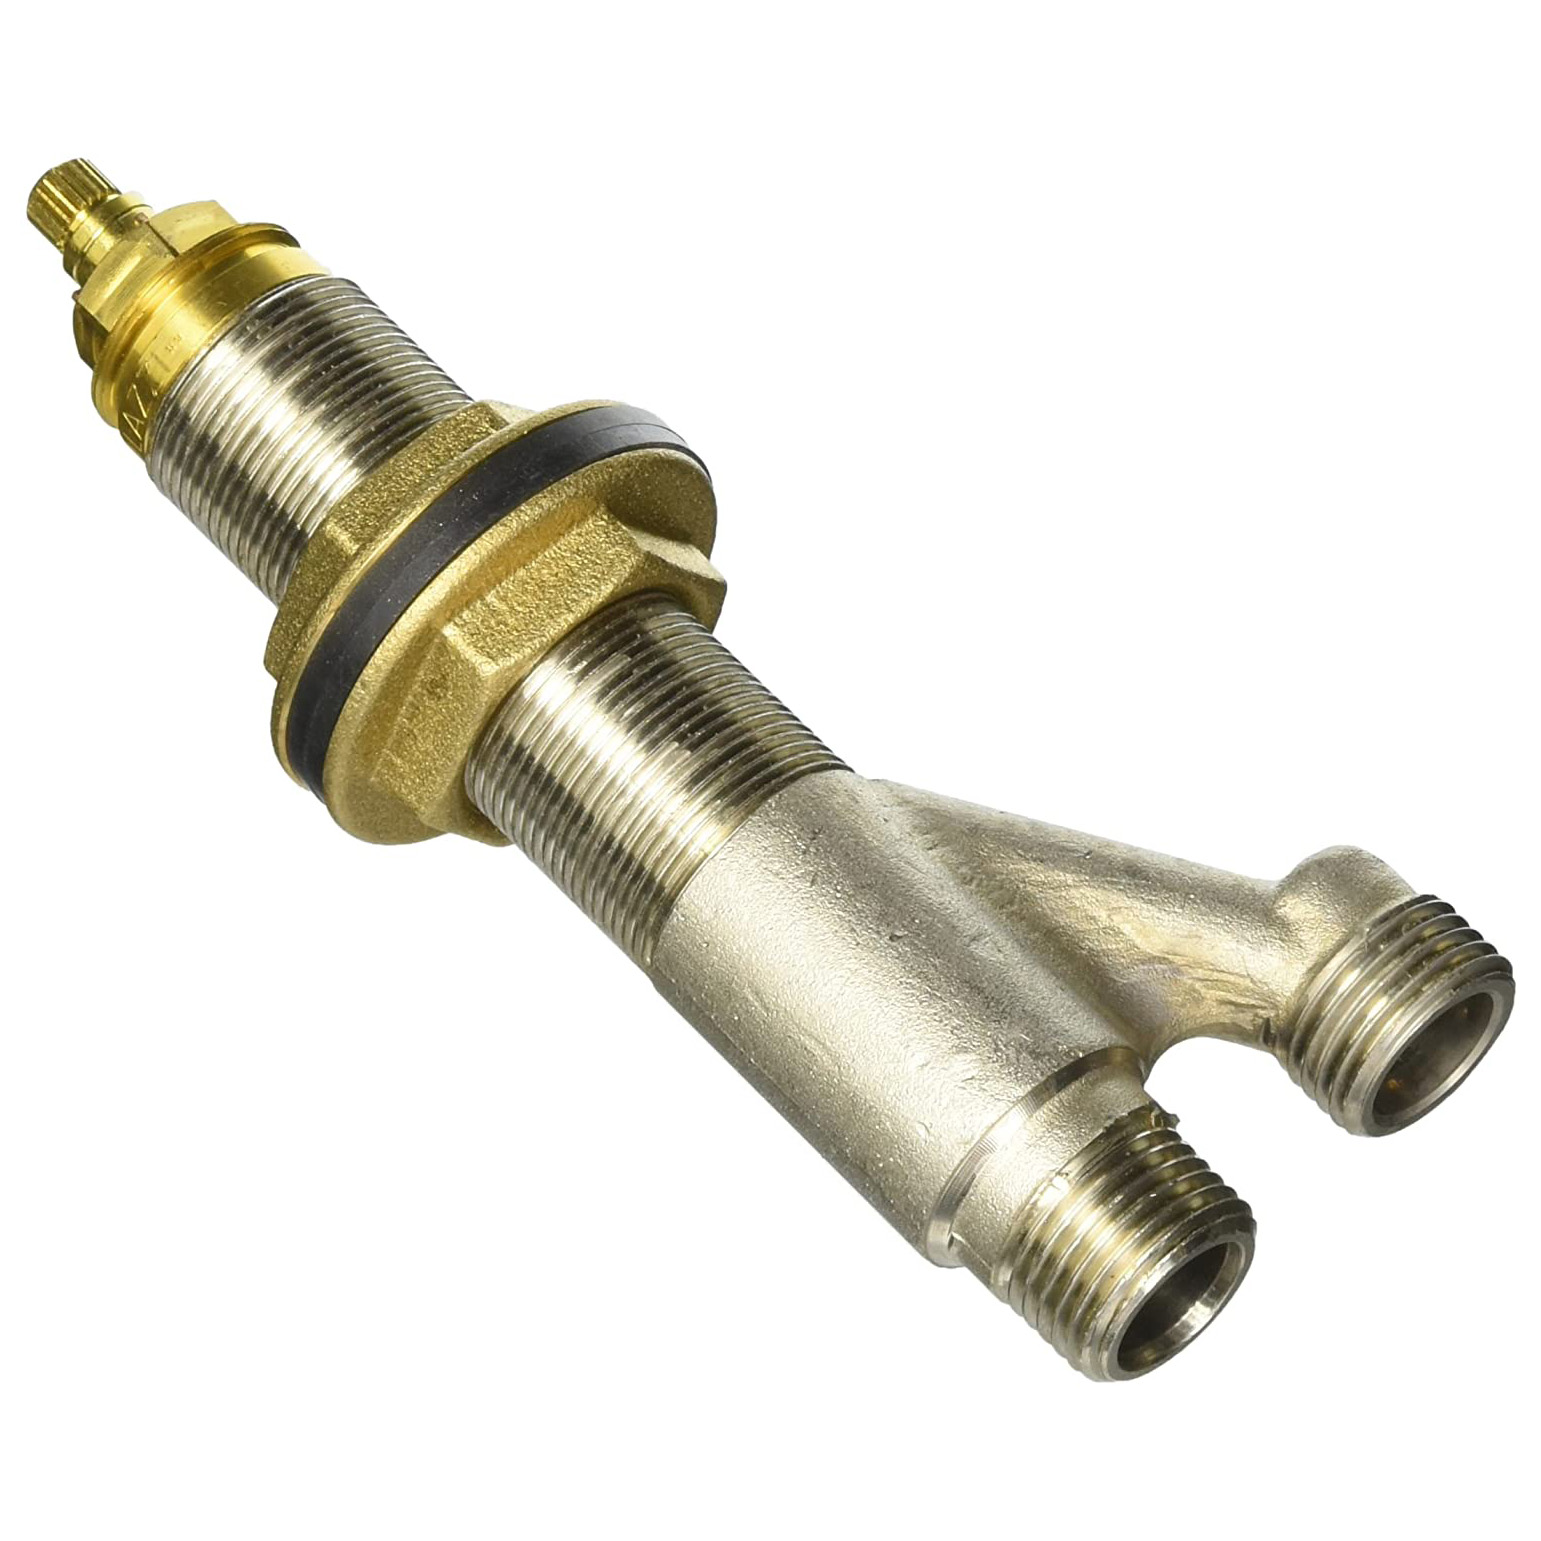 Side Valve Rough-in 1/2" for Lav Faucet Right/Cold Handle